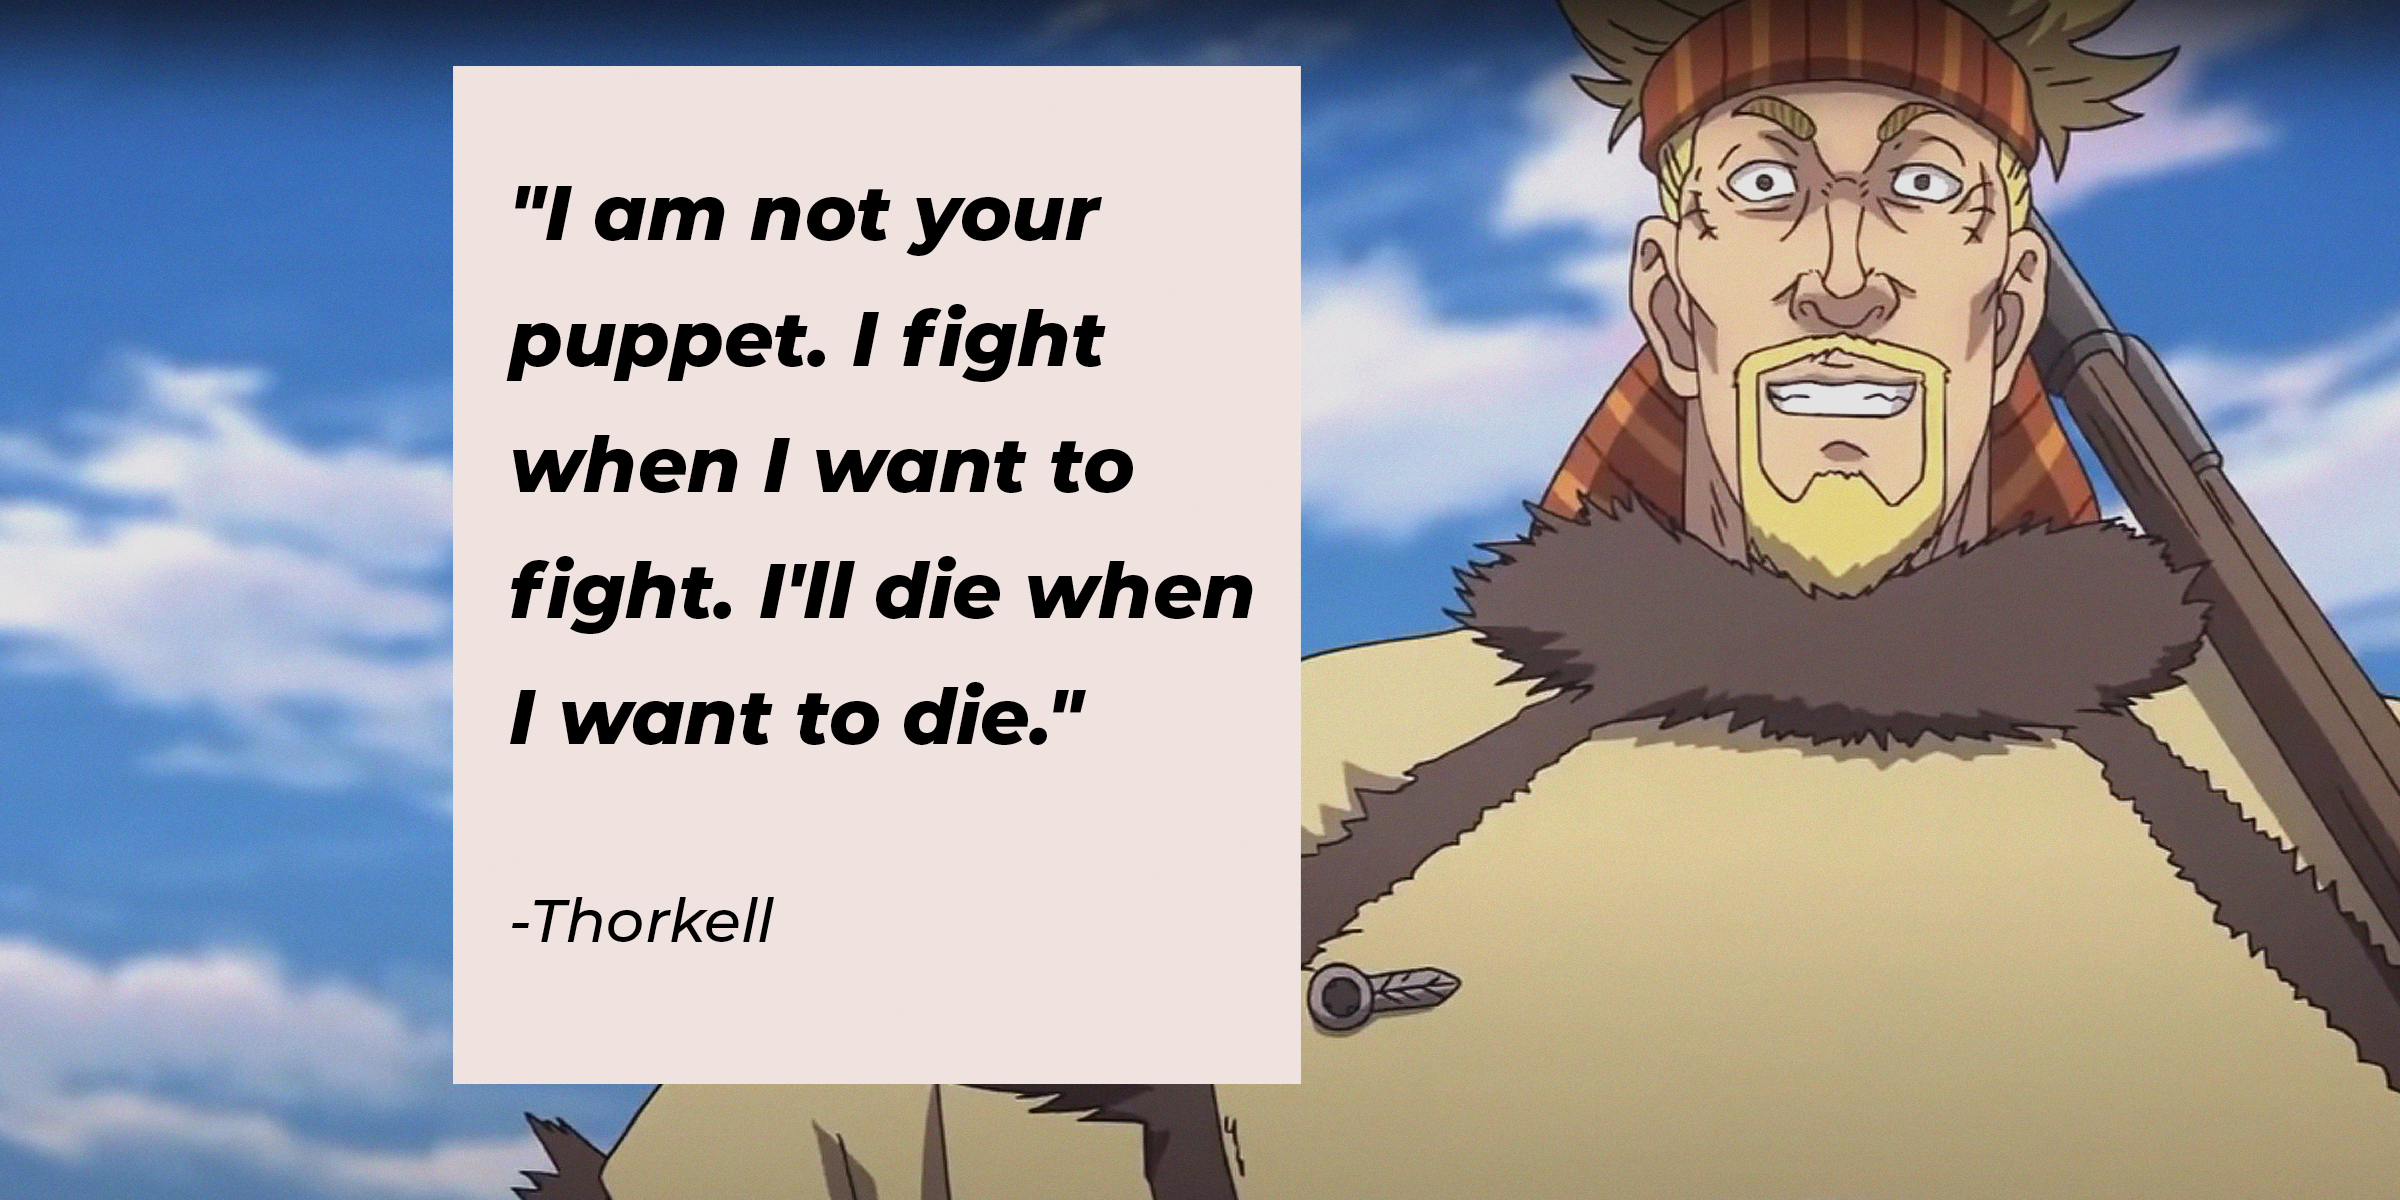 A picture of Thorkell with his quote: "I am not your puppet. I fight when I want to fight. I'll die when I want to die." | Source: facebook.com/VinlandSagaT